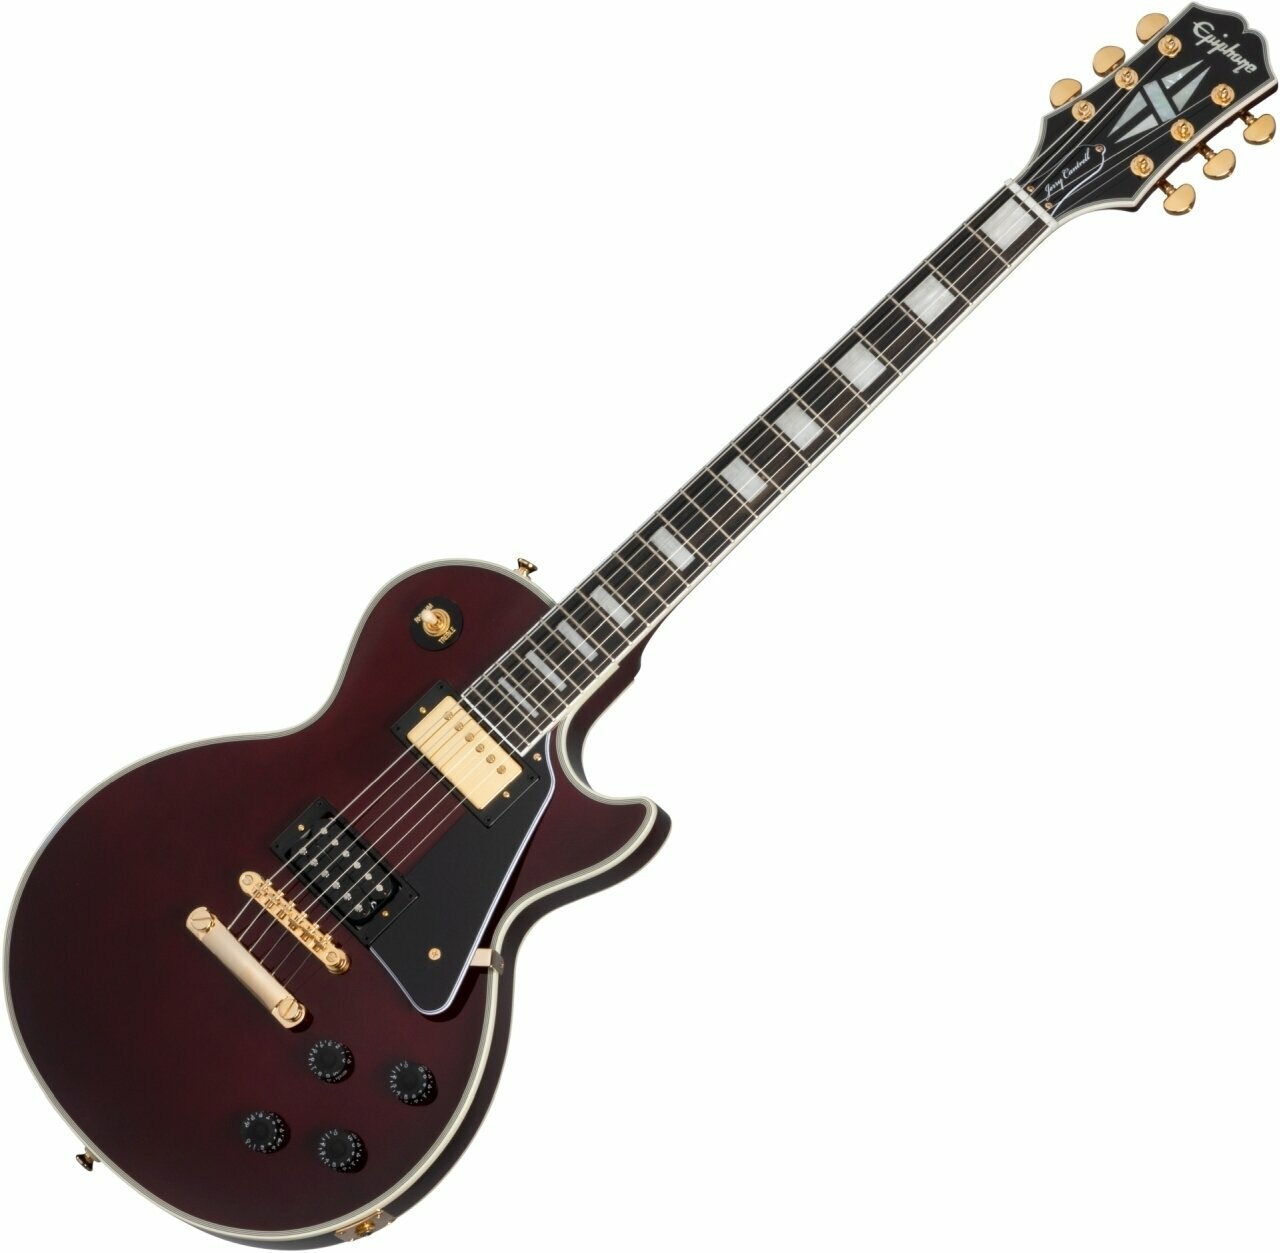 Electric guitar Epiphone Jerry Cantrell "Wino" Les Paul Custom Dark Wine Red